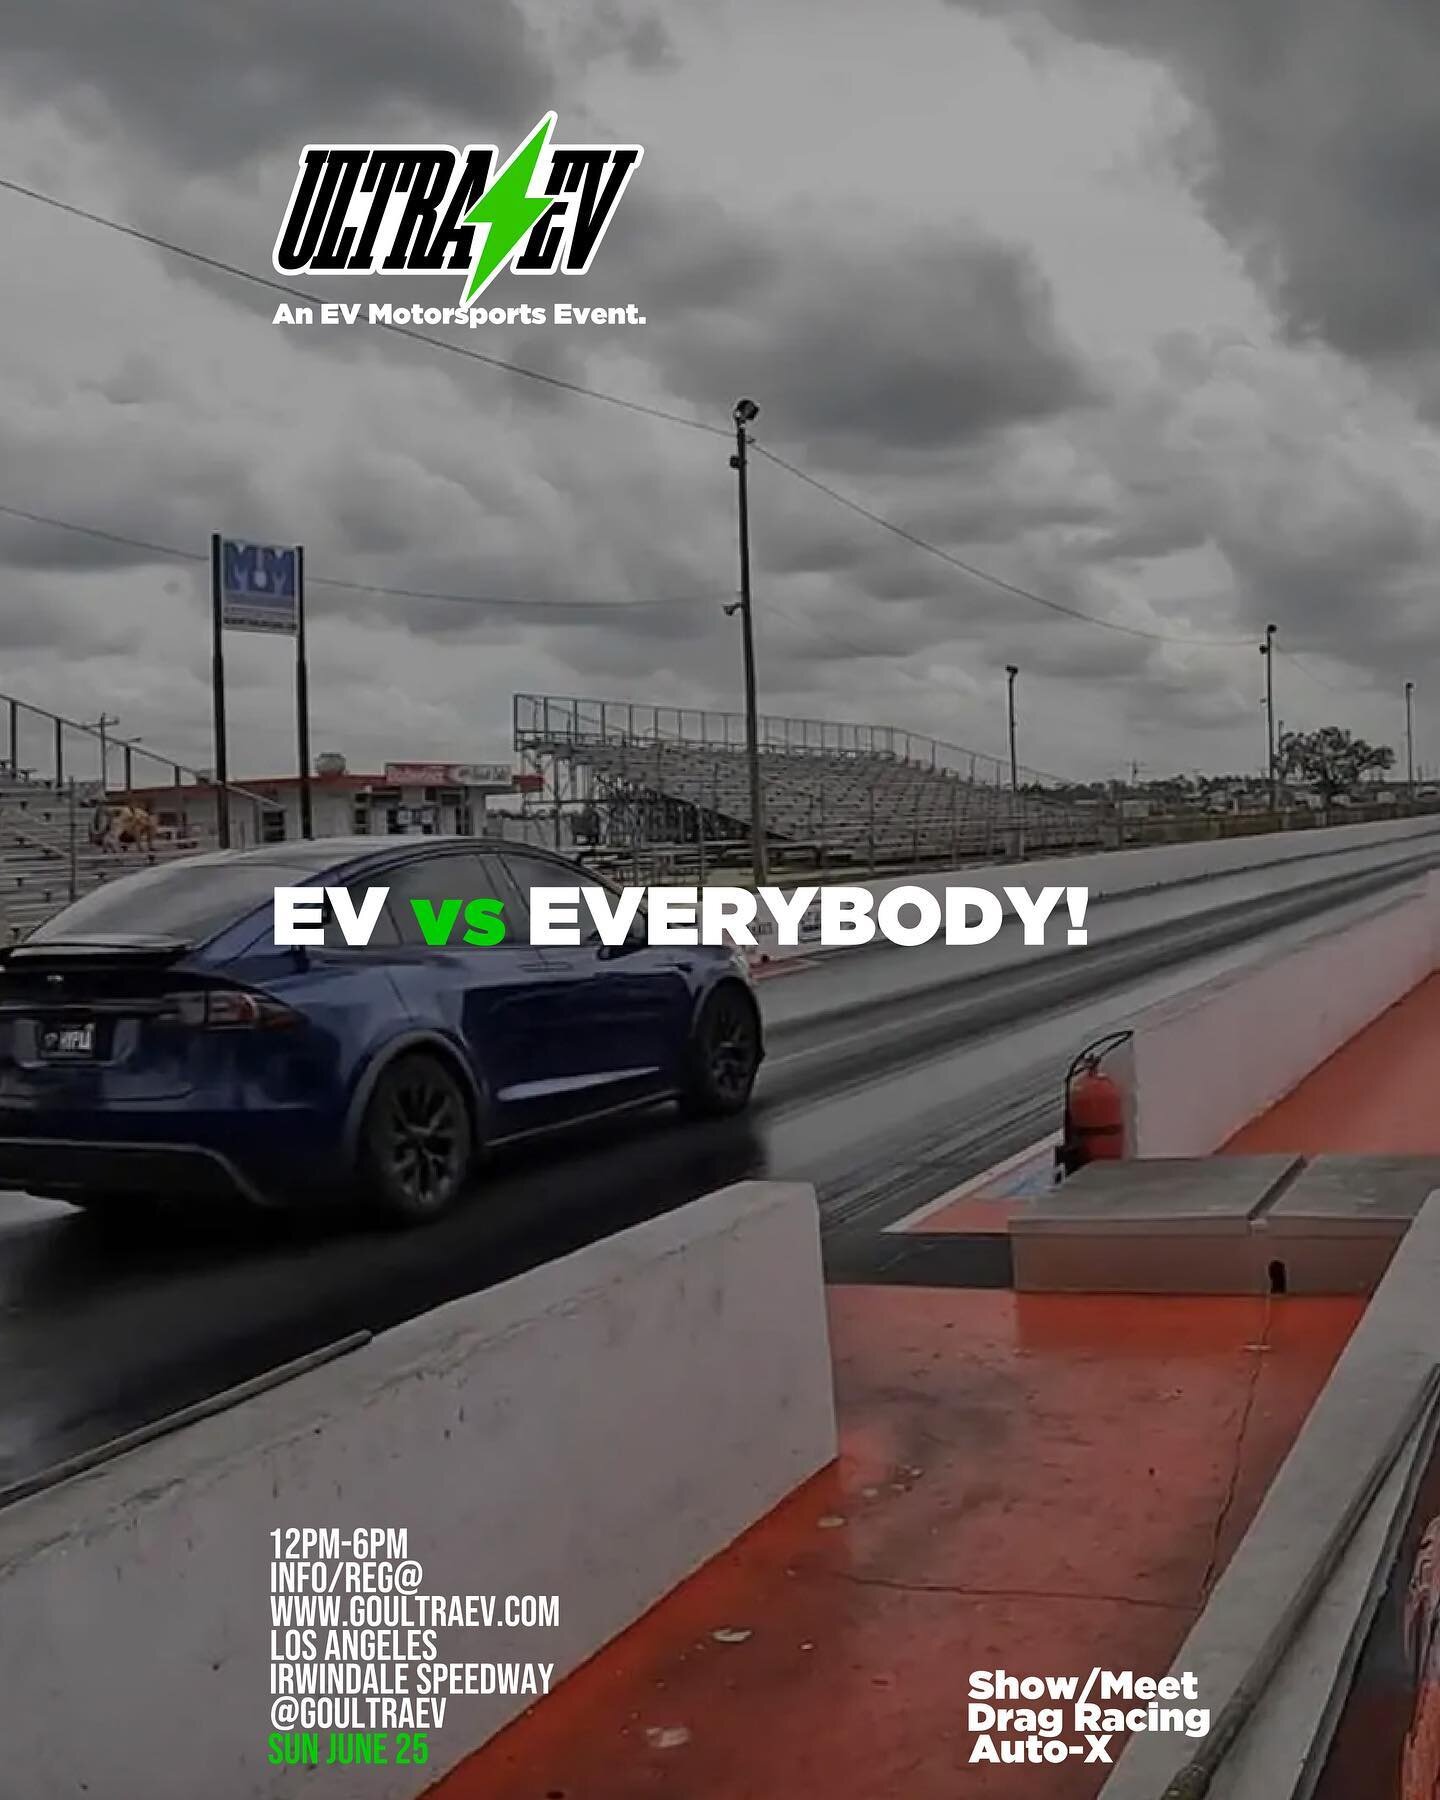 EV vs EVERYBODY!⚡️🚀 
We are looking for cars to run to Race or just simply to Test/Tune. Let&rsquo;s have some fun! Tag away🗣

ULTRA EV - LA
&ldquo;An EV Motorsports Event&rdquo;

Sunday June 25, 2023
Irwindale Speedway
12PM-6PM

Info/Registrations